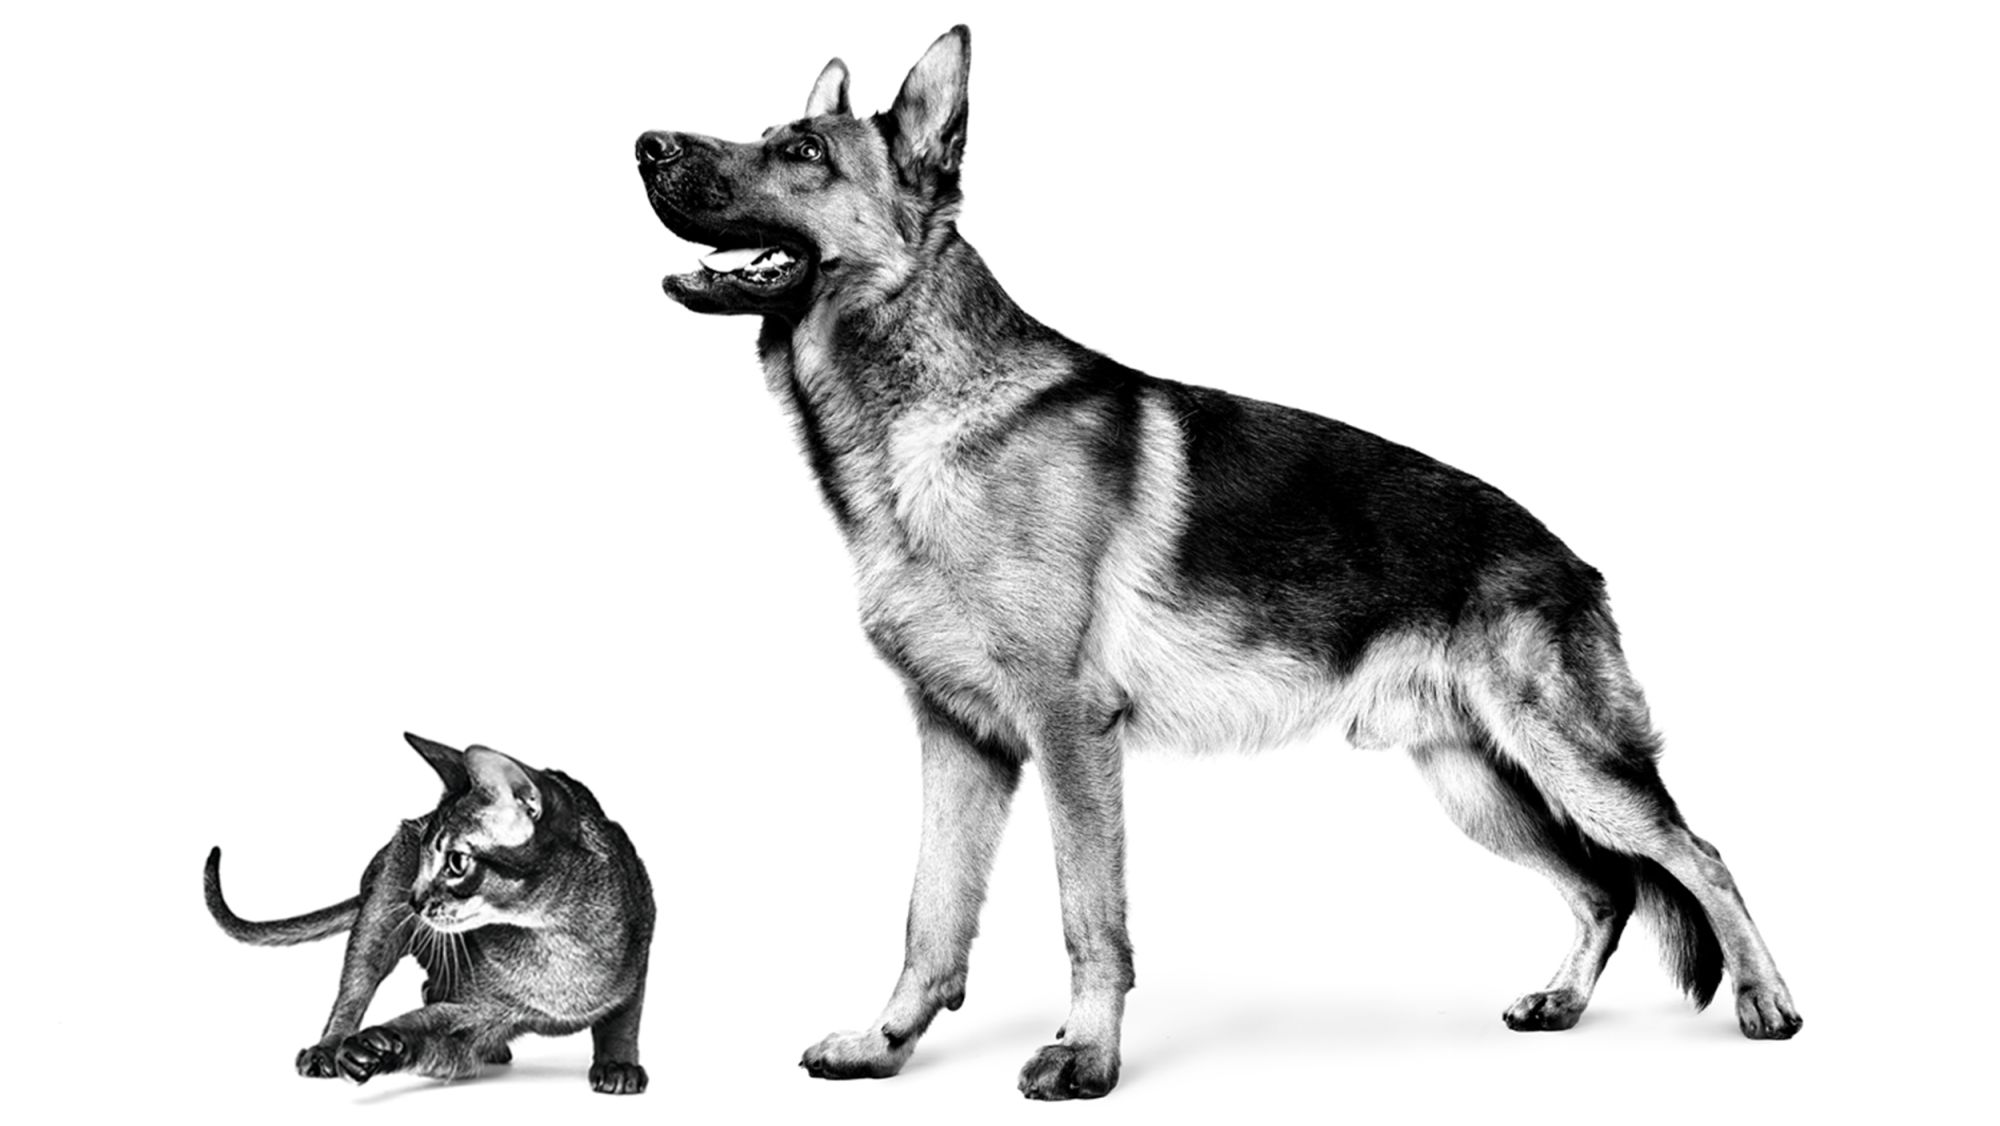 Adult German Shepherd and Abyssinian cat standing in black and white on a white background